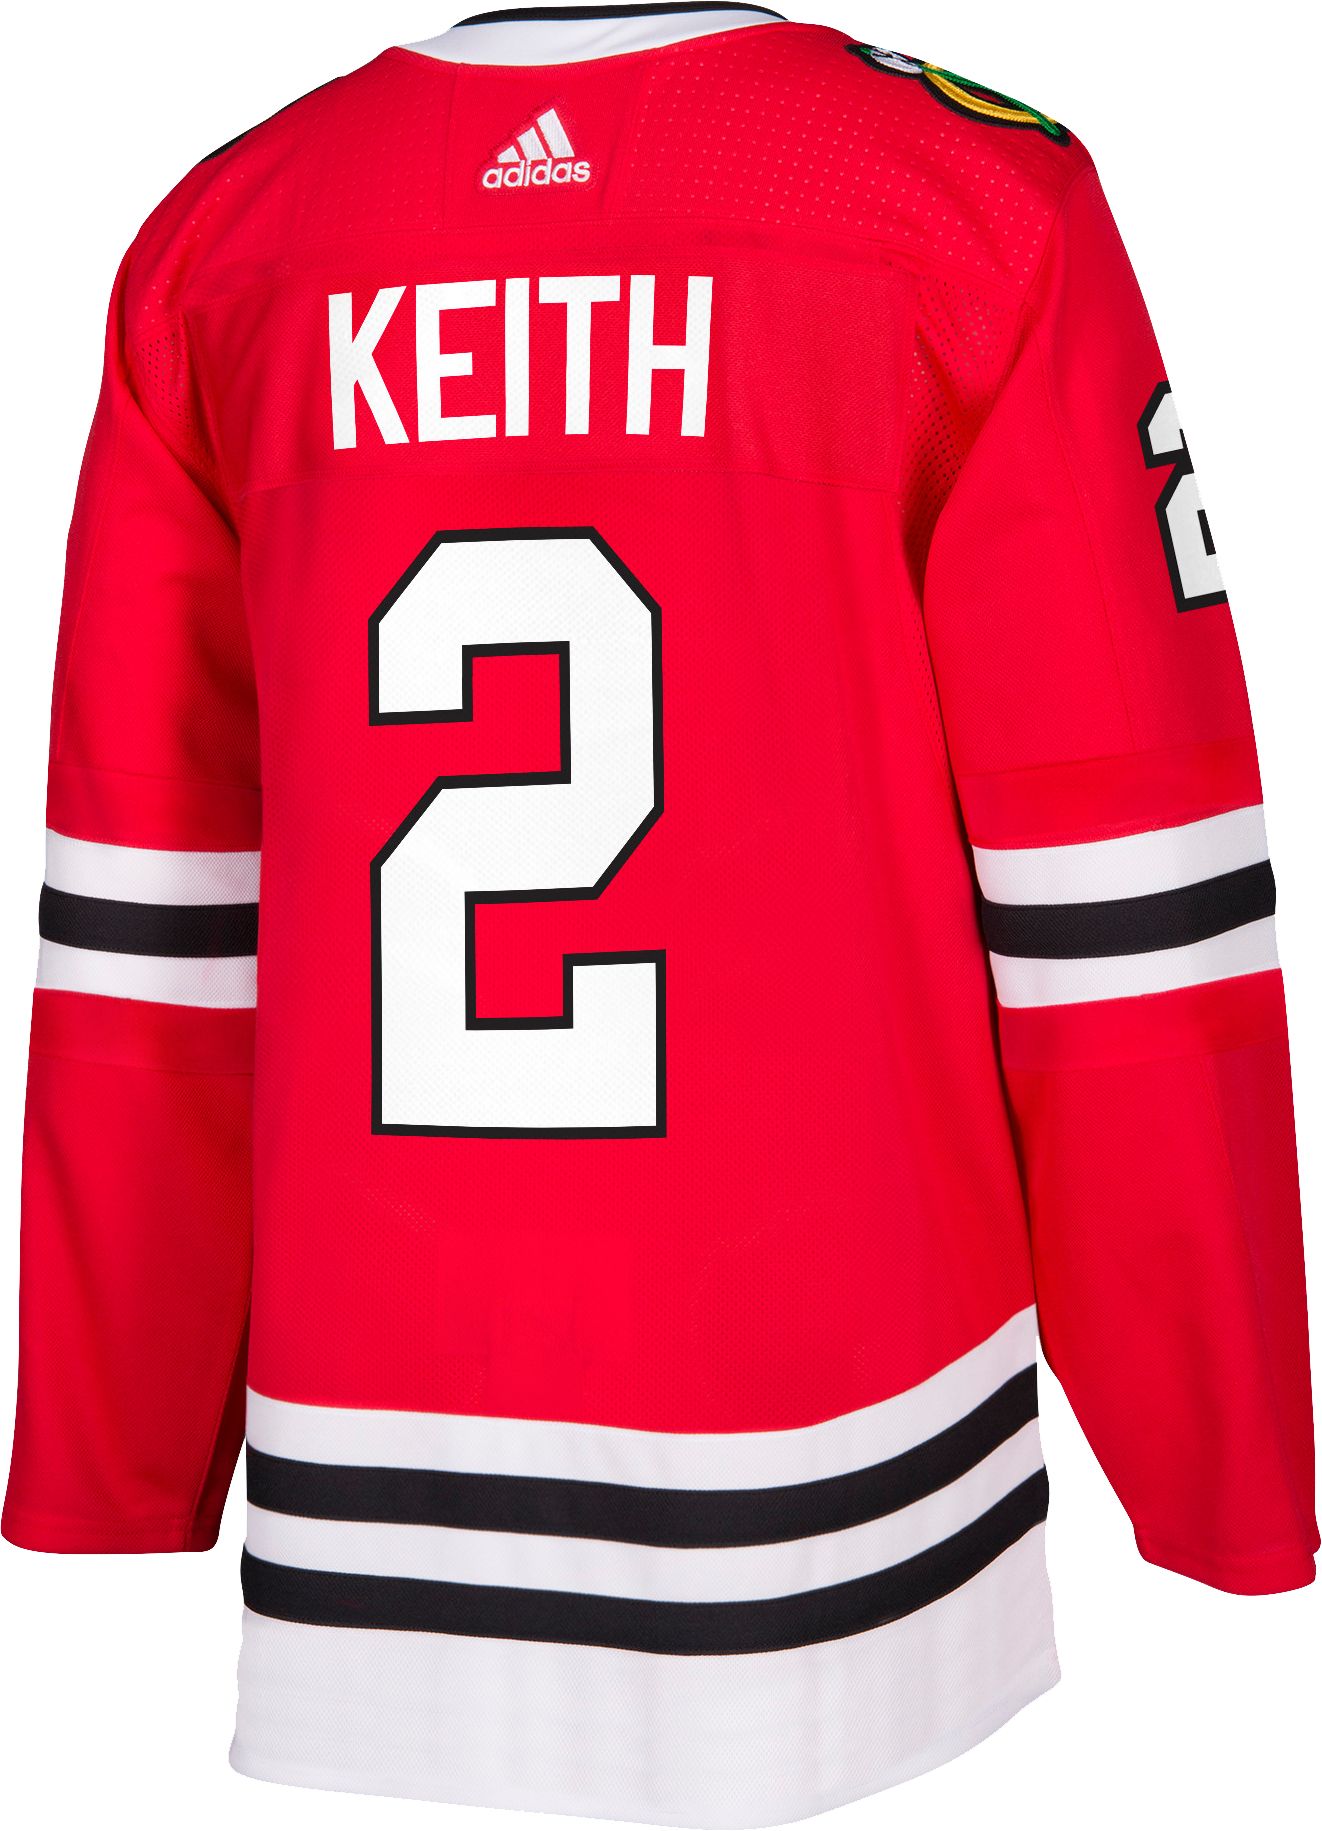 duncan keith a jersey